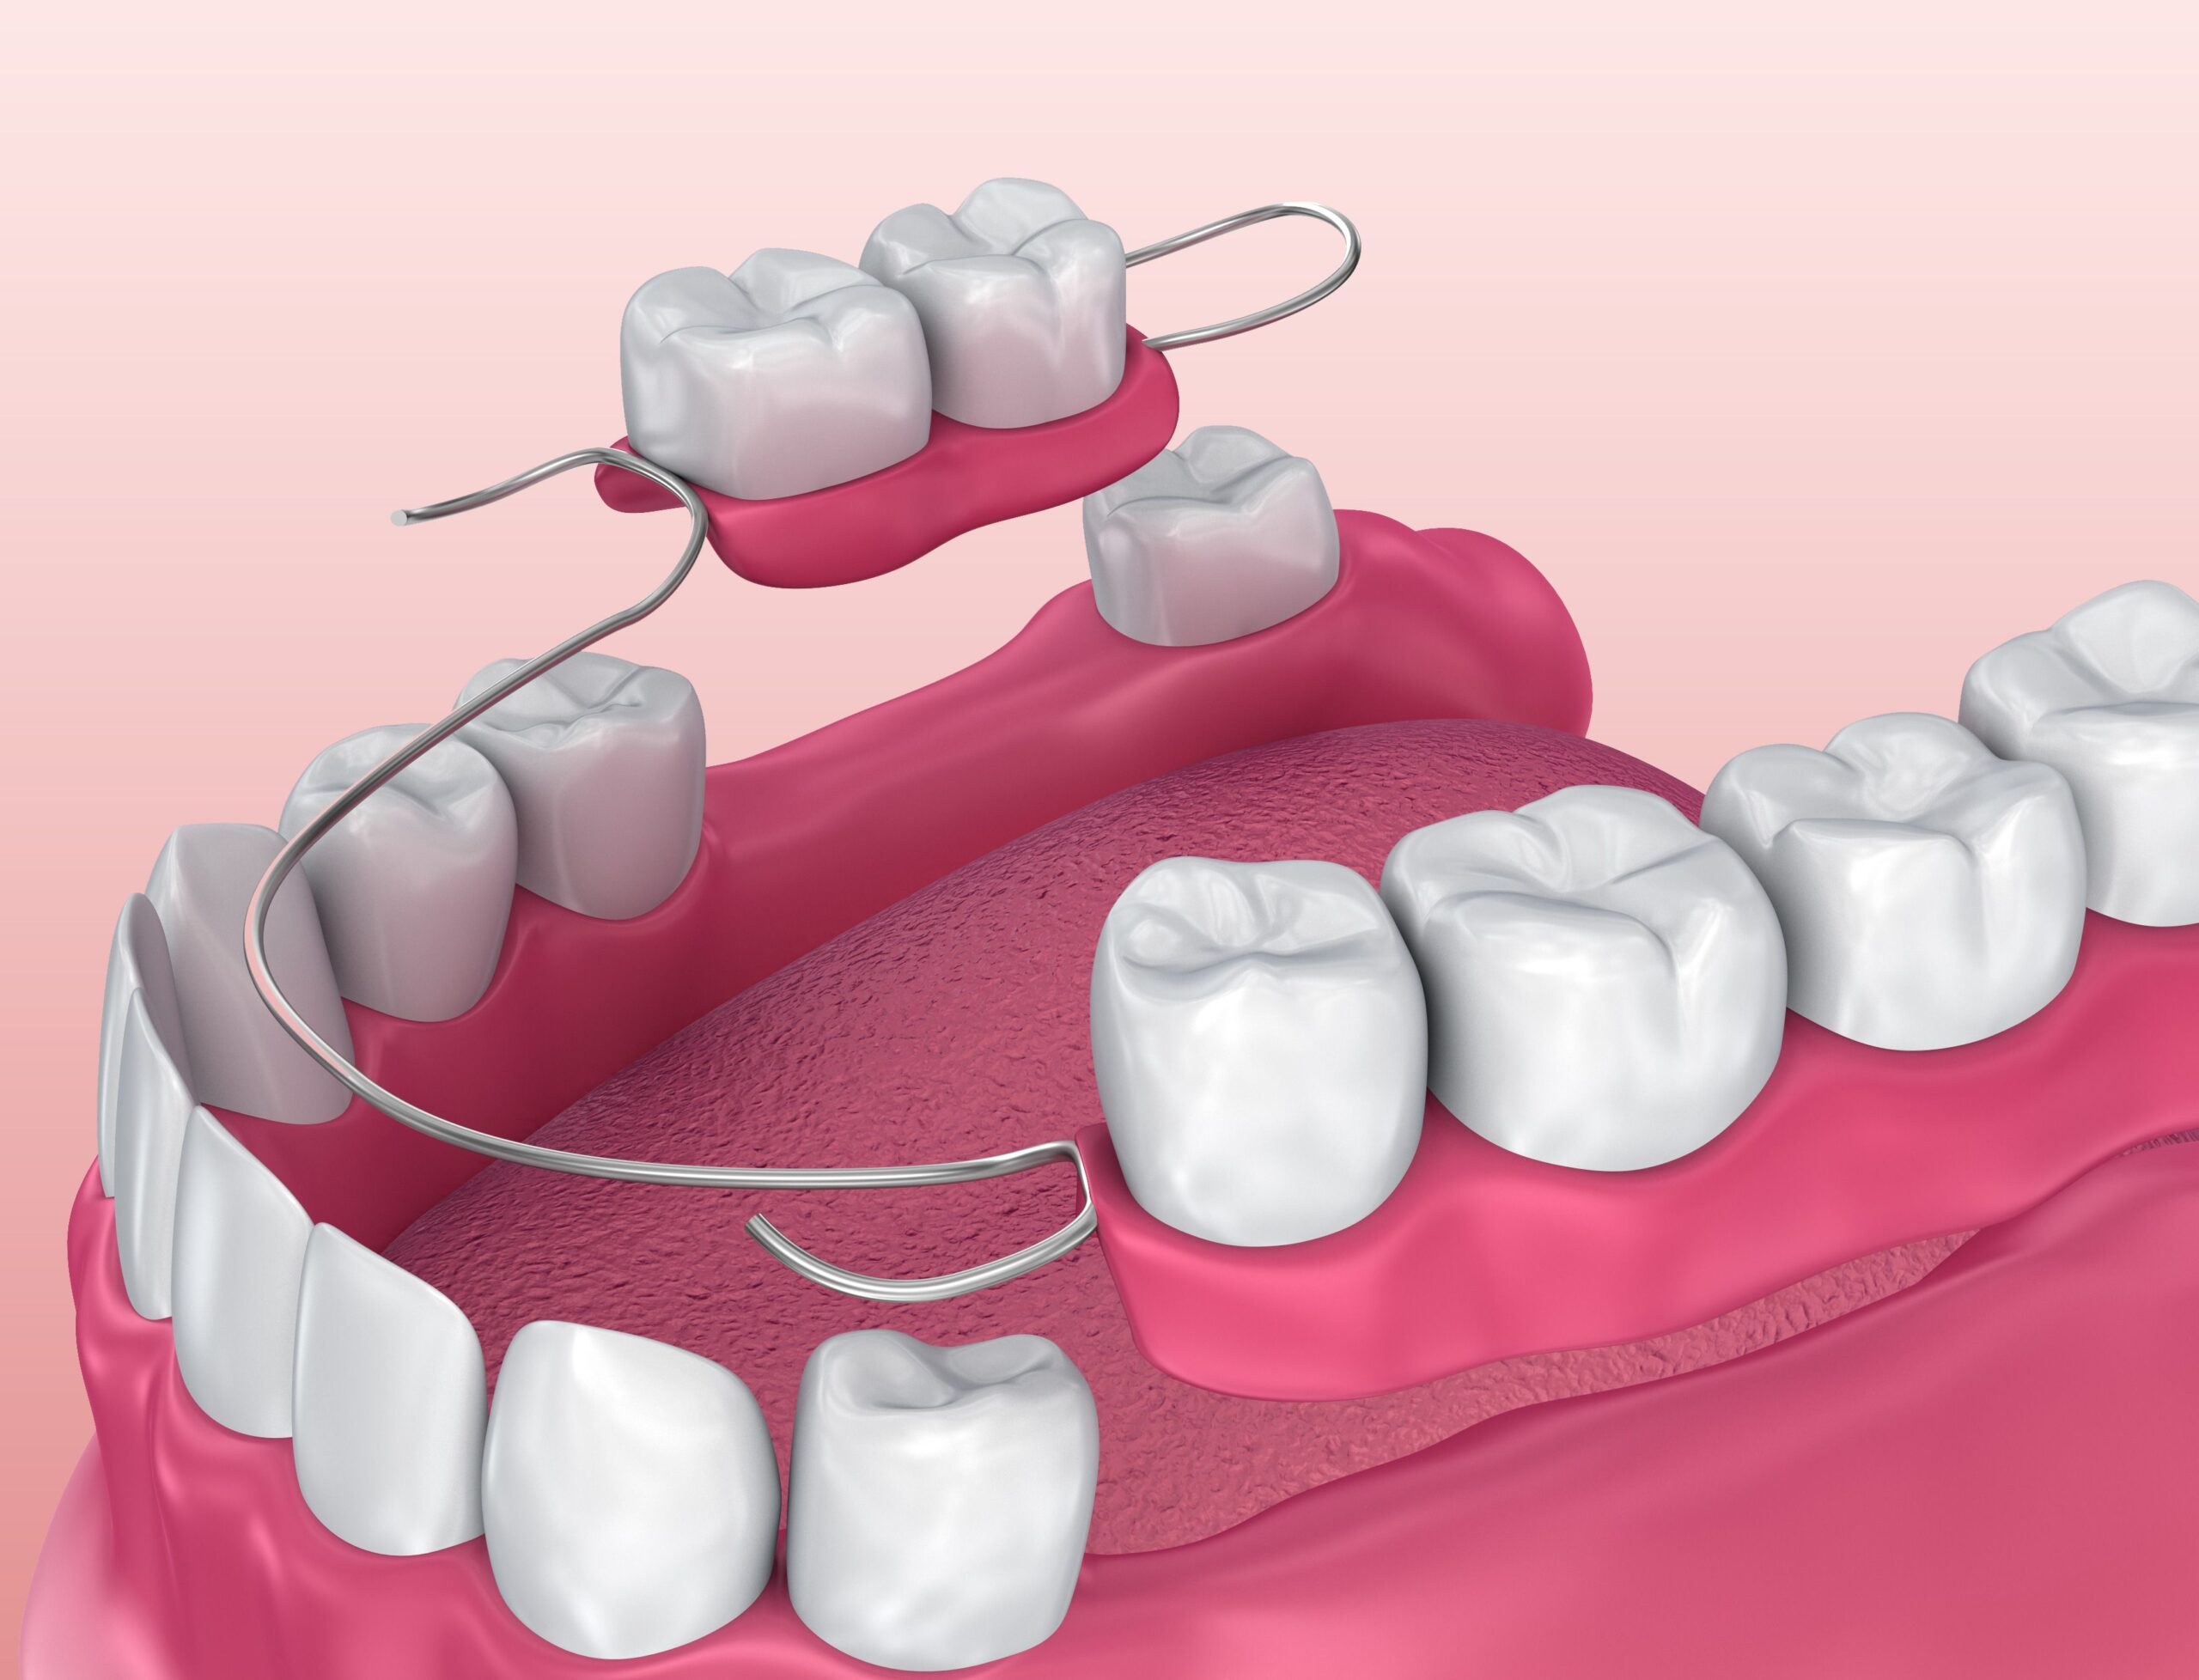 A Comprehensive Guide to Implant Dentistry in Houston